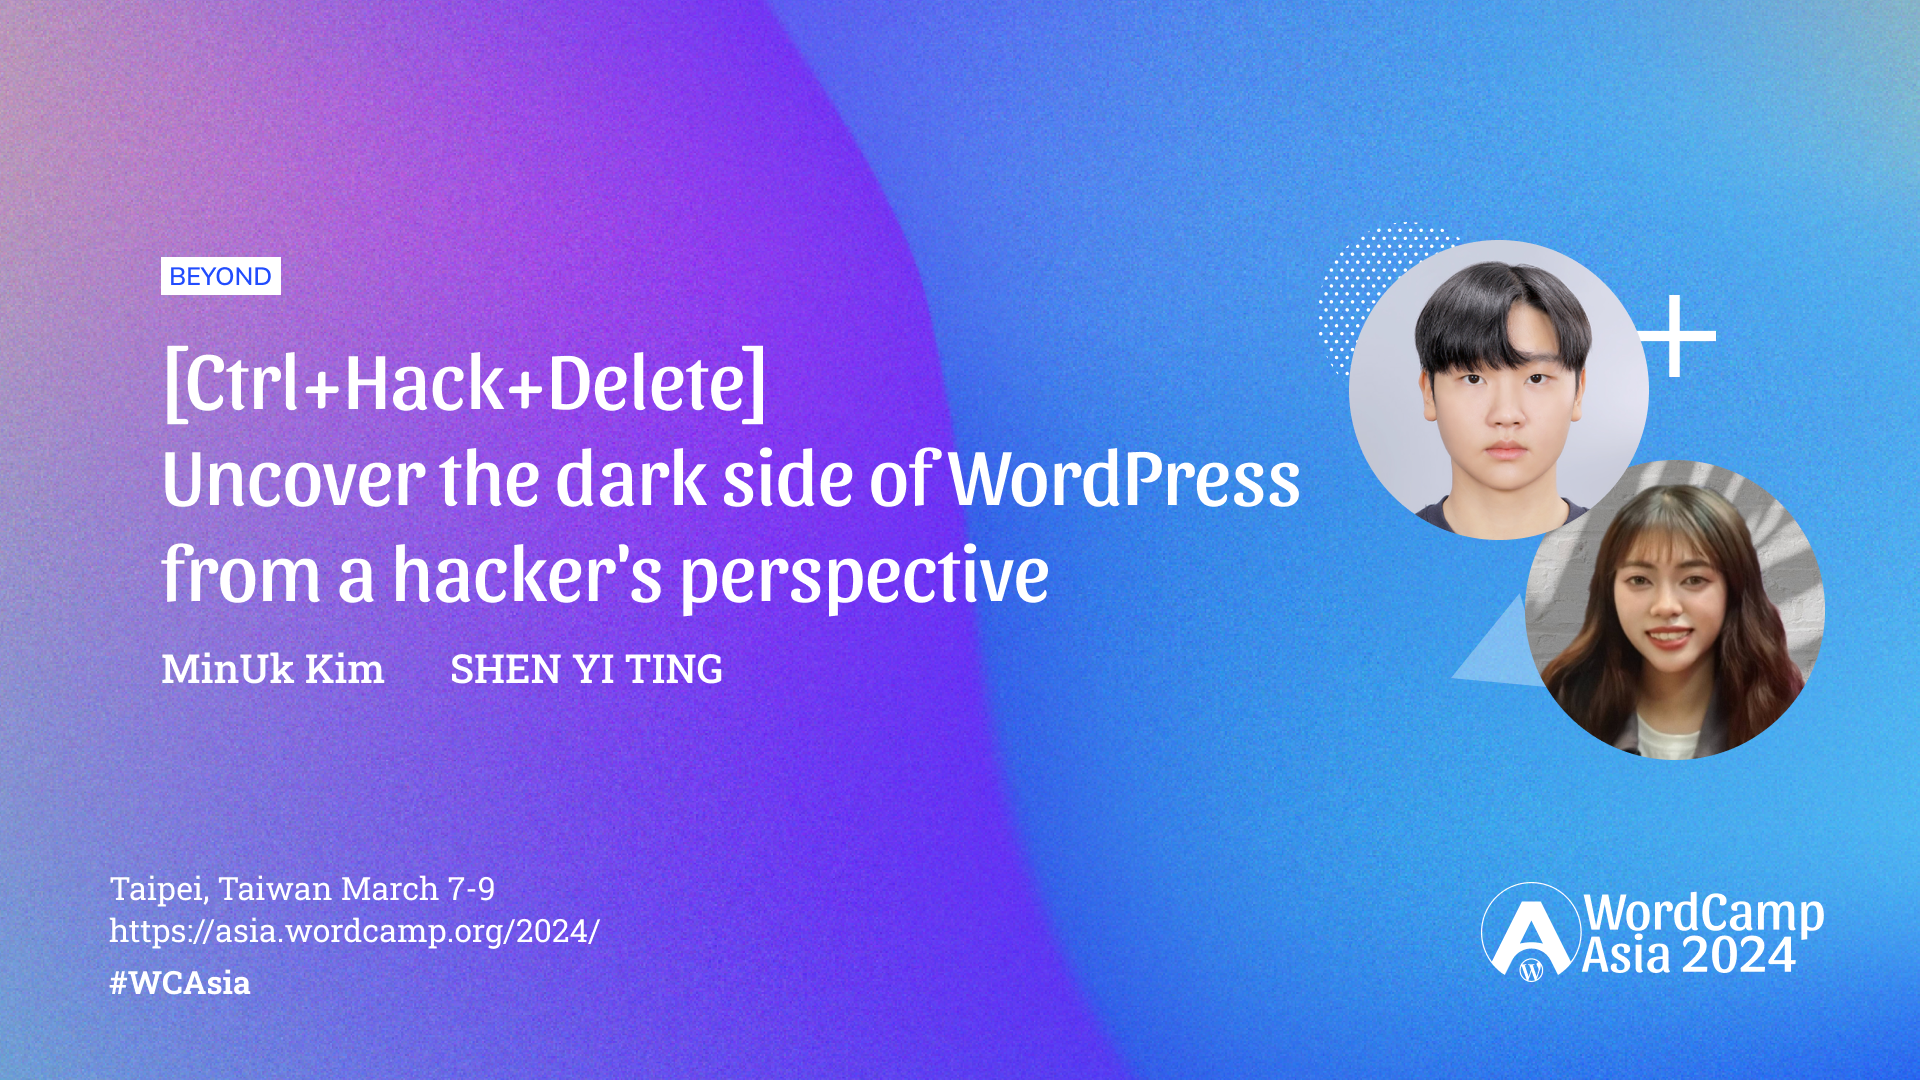 【Ctrl+Hack+Delete】 Uncover the dark side of WordPress from a hacker’s perspective